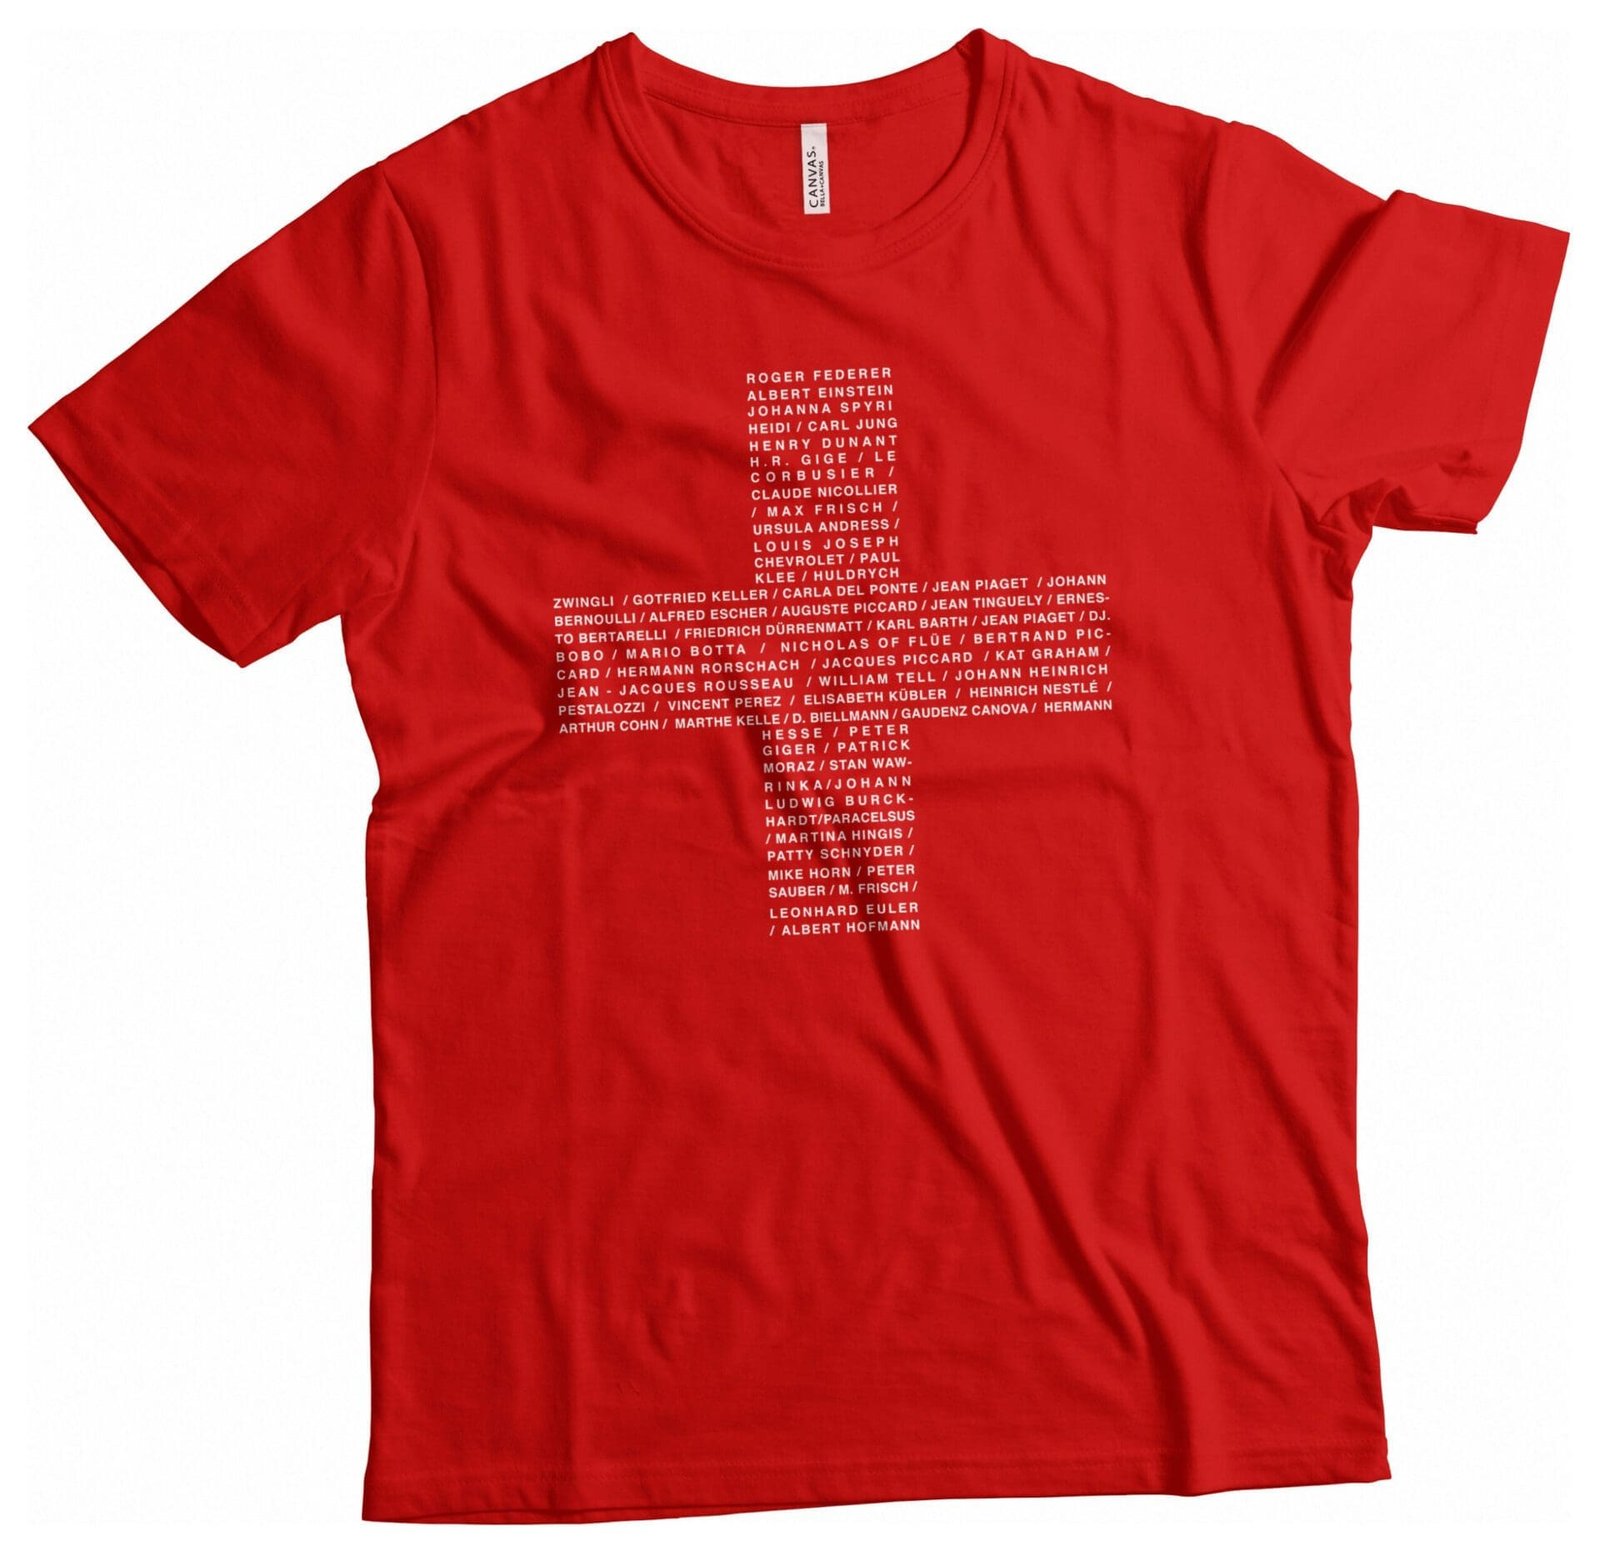 A red Swiss Cross With Names Of Famous Swiss Personalities Switzerland / Helvetica T-shirt.